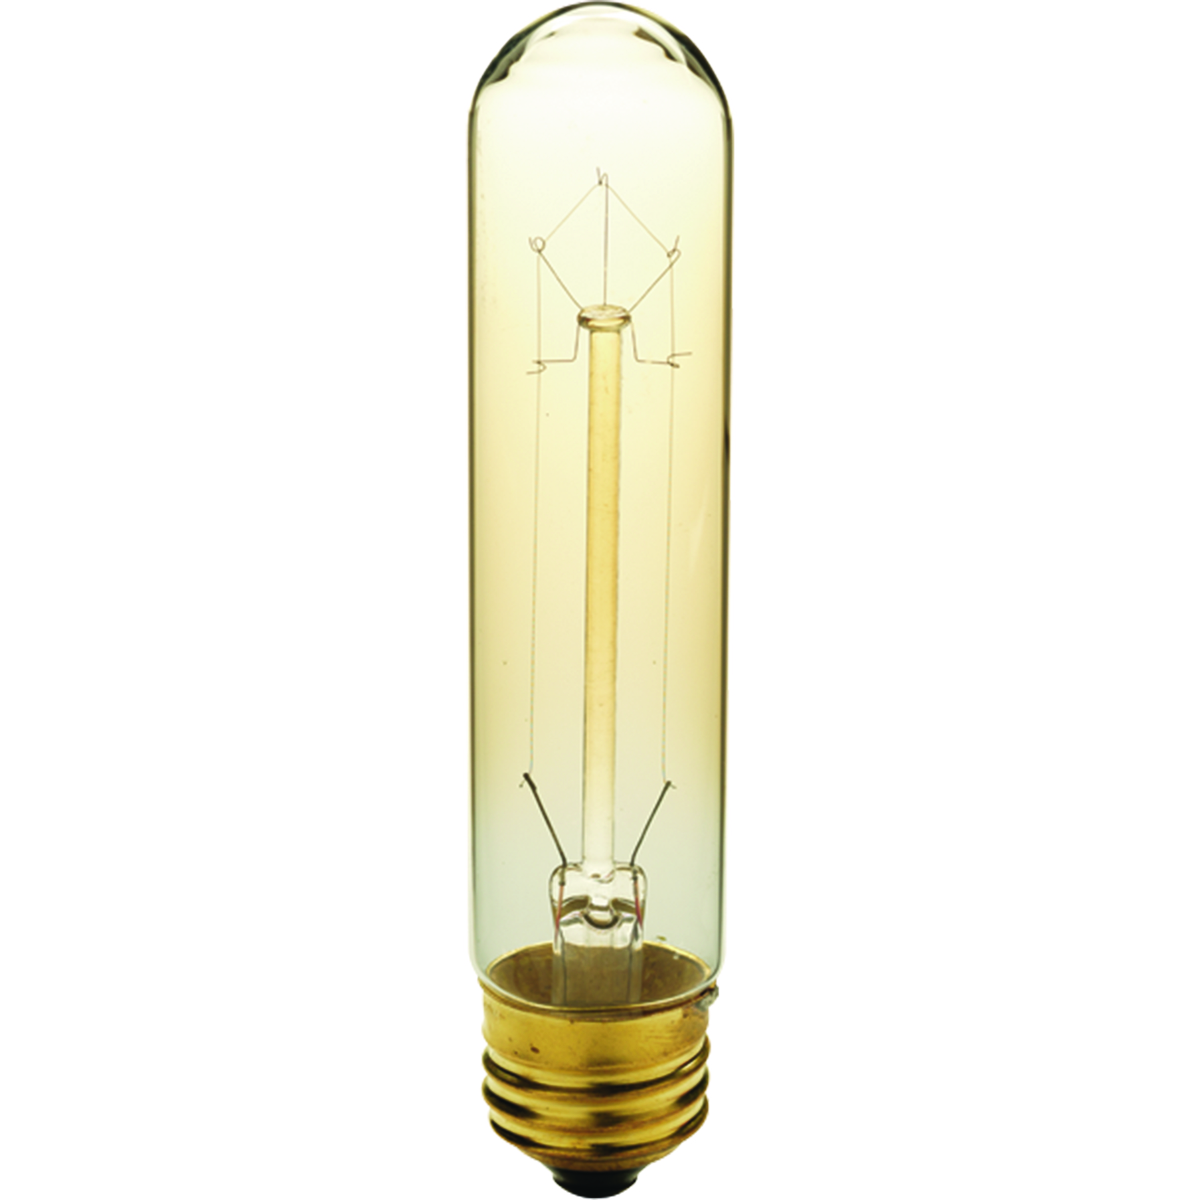 Medium base E26 T9 vintage style antique 40 watt light bulb. This popular lamp is perfect with our Swing, Draper, Archives, Penn and many more collections.